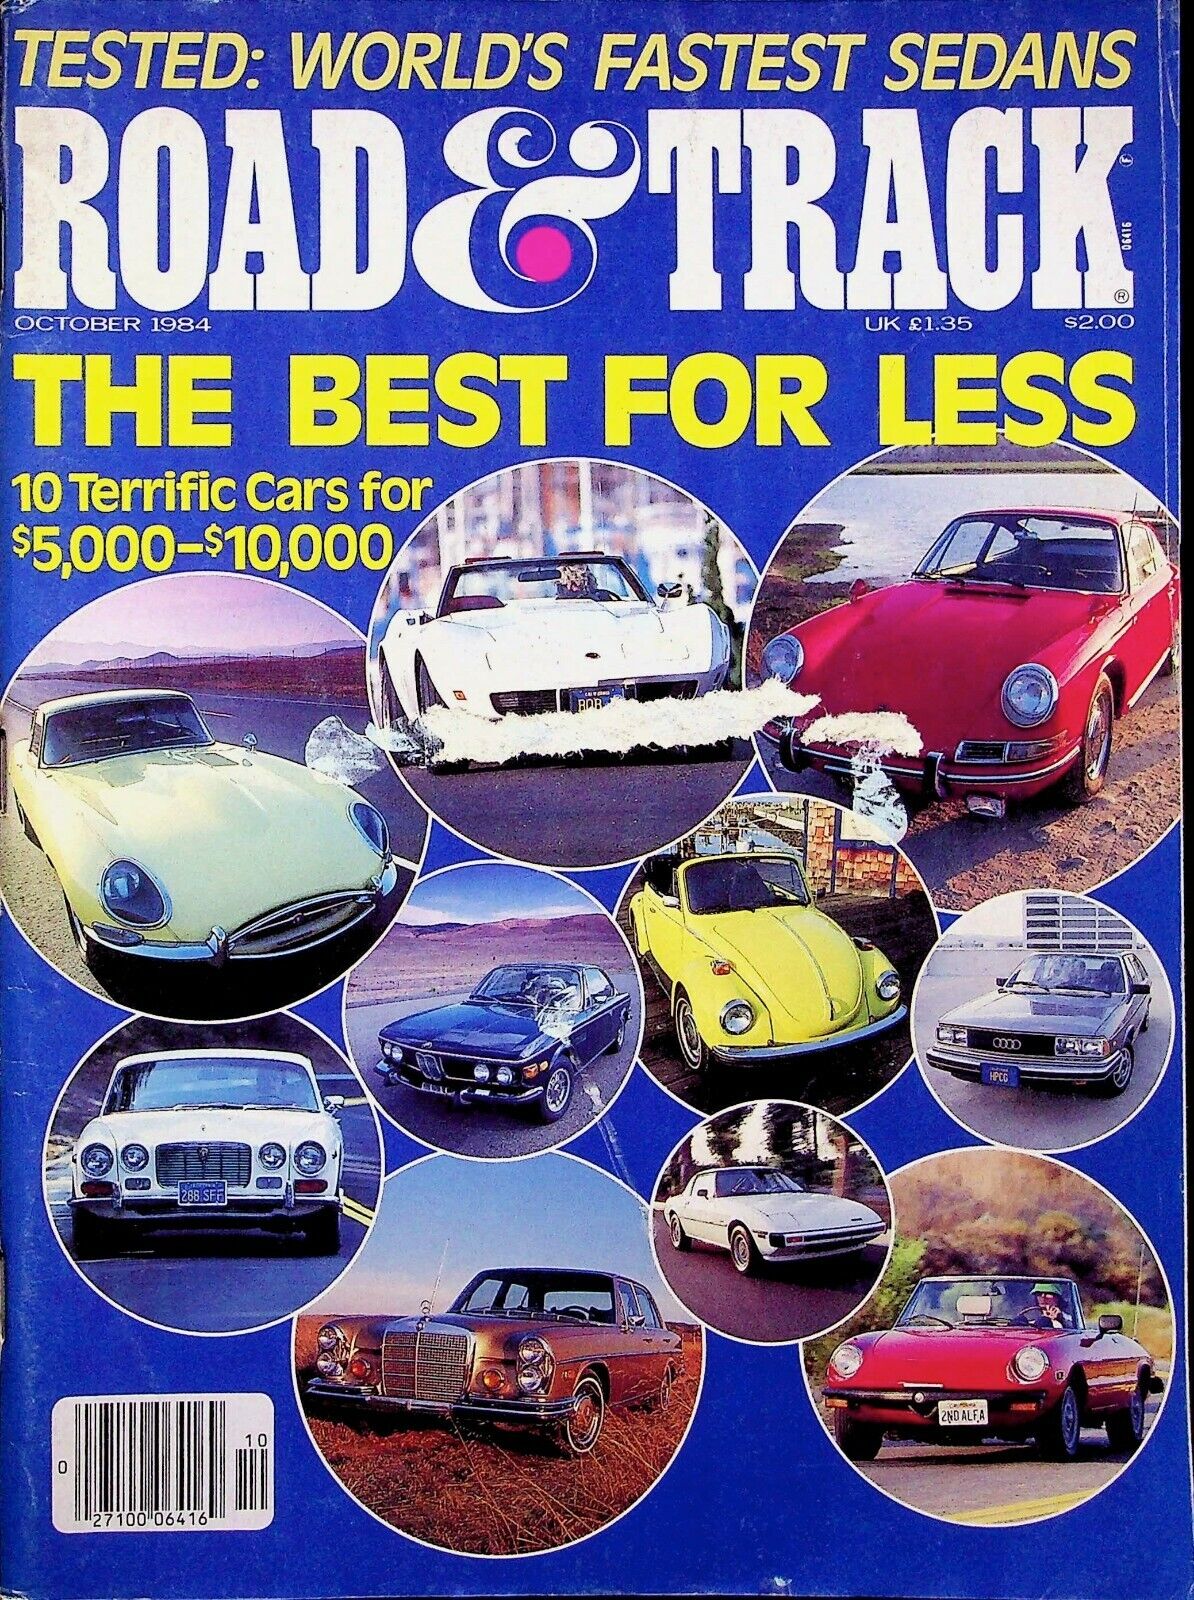 THE BEST FOR LESS - CAR AND DRIVER MAGAZINE, OCTOBER 1984 VOLUME 36, NUMBER 2